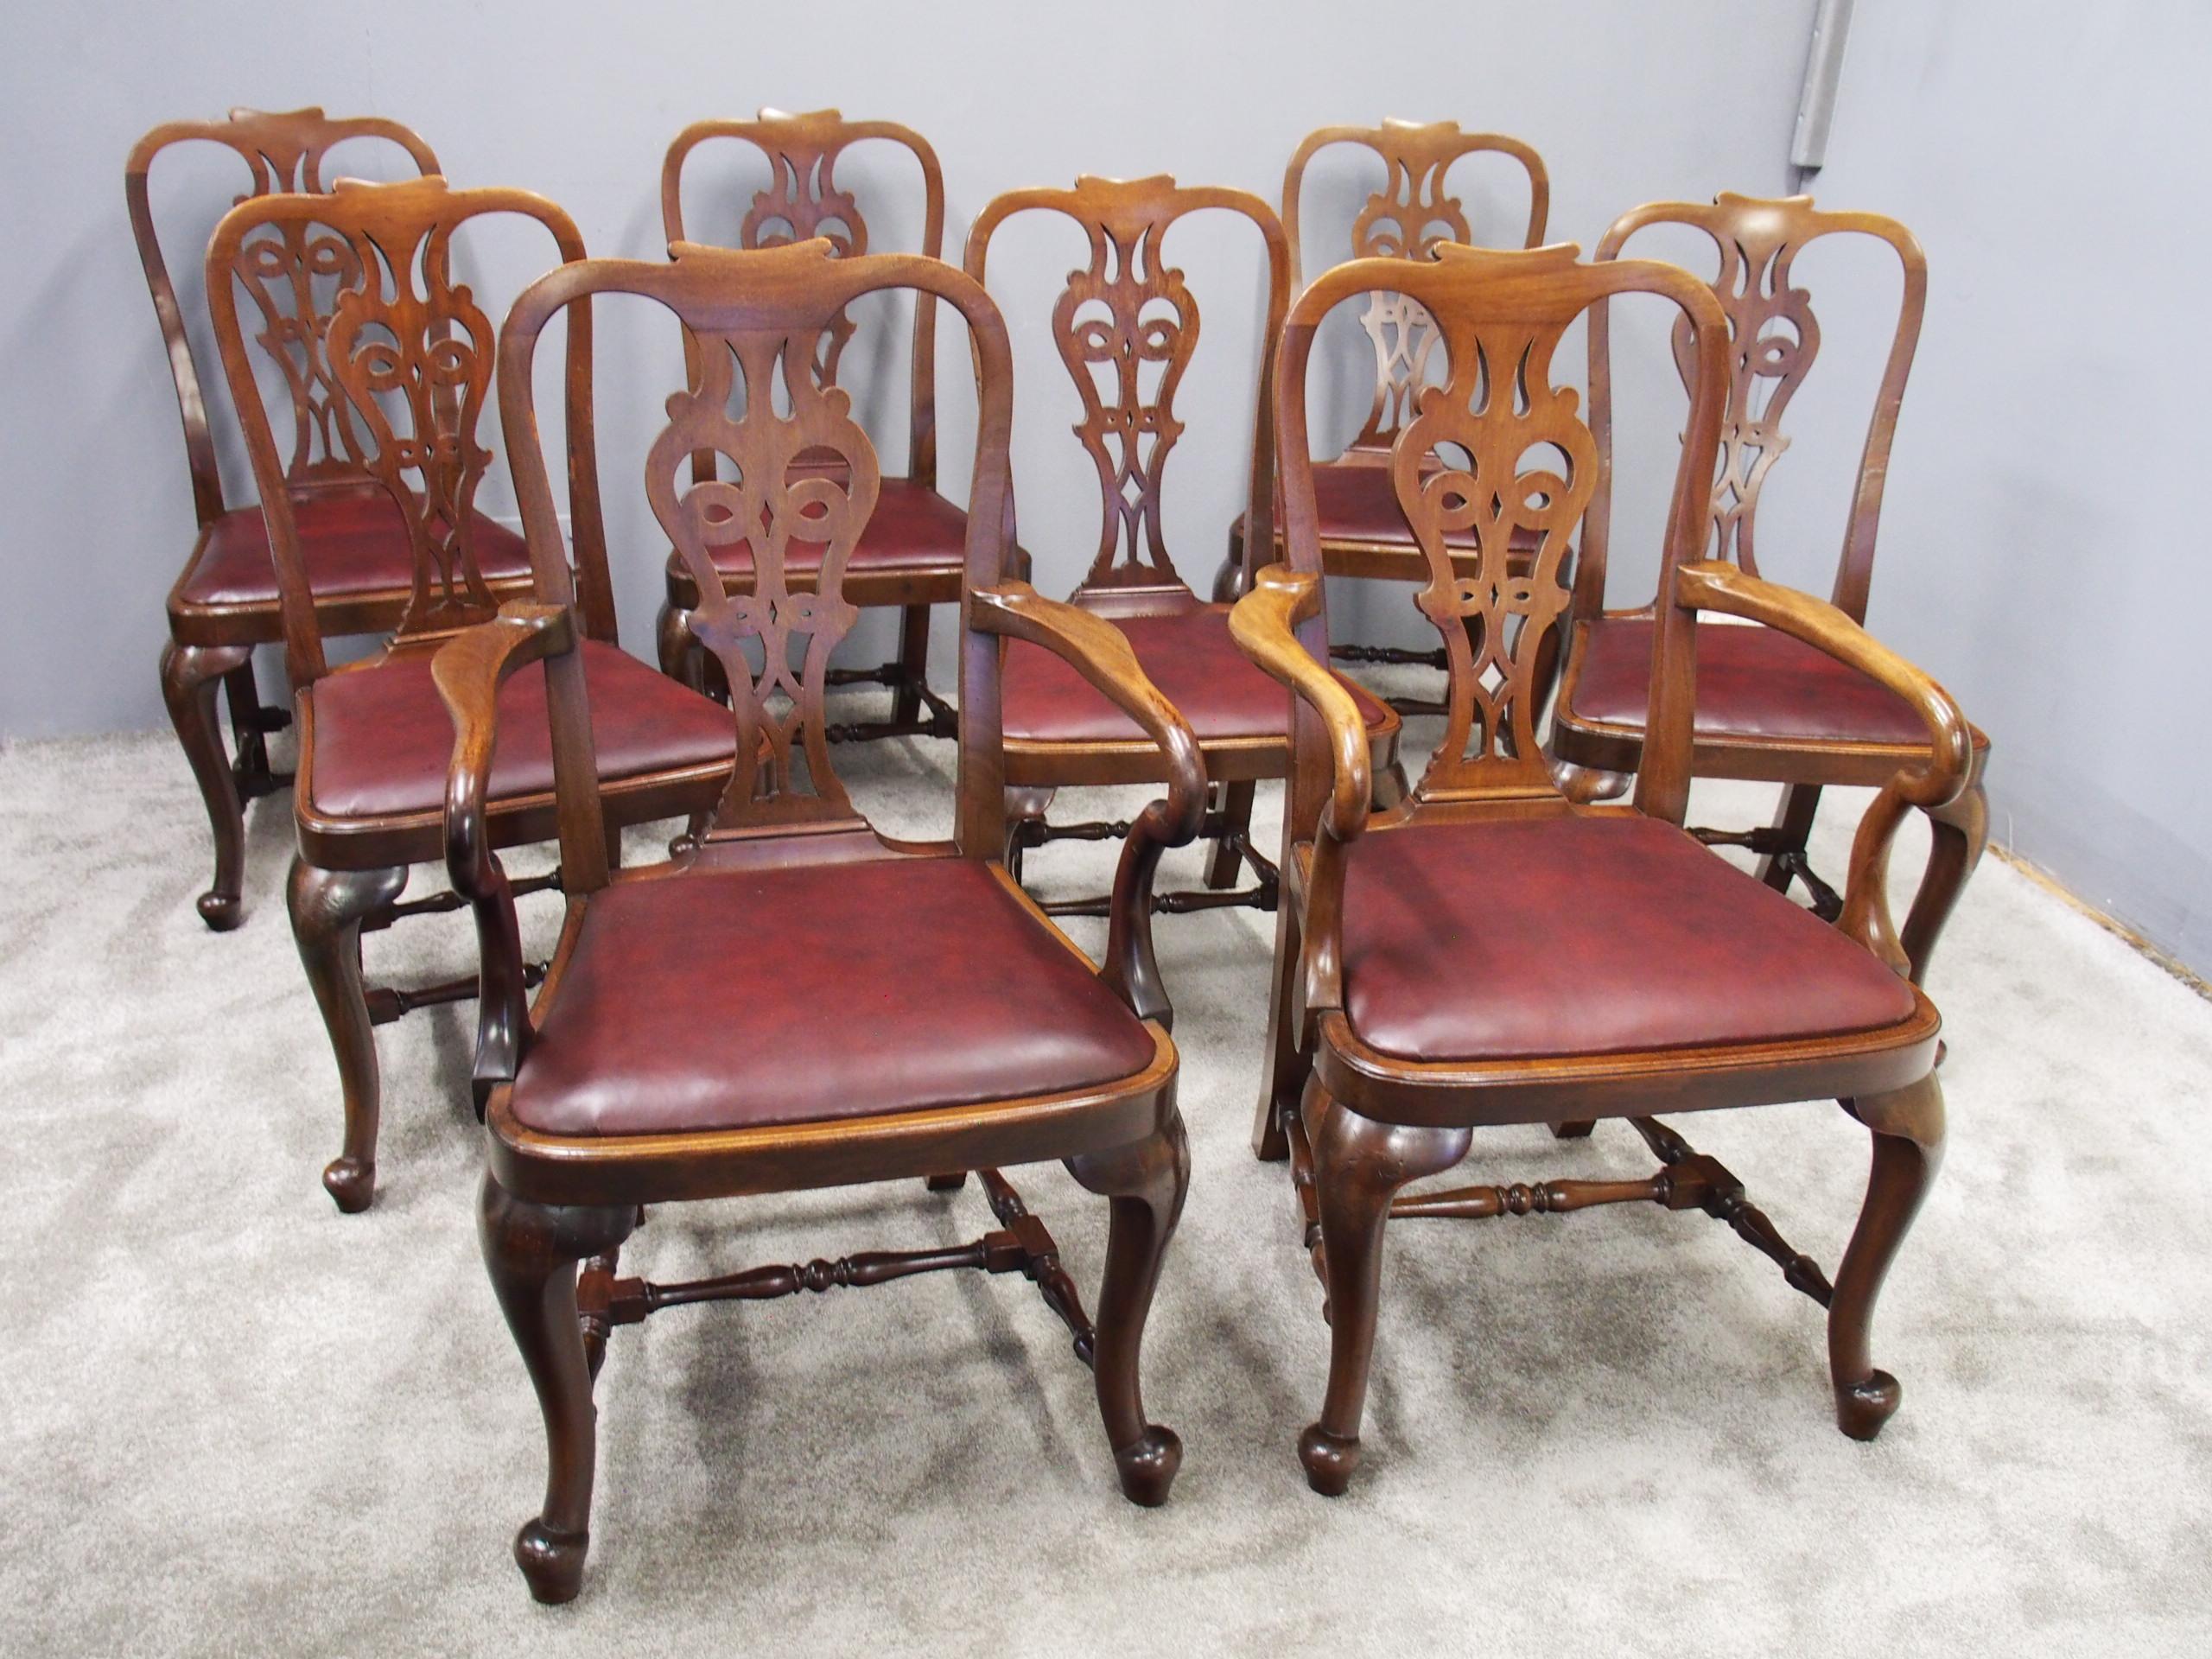 Set of 8 mahogany George II style armchairs. With shaped toprail, Queen Anne style splat and open fretwork leading to a recently re-upholstered leather drop-in seat pad. The arms finish in a shepherds crook to the front and are fixed to the side